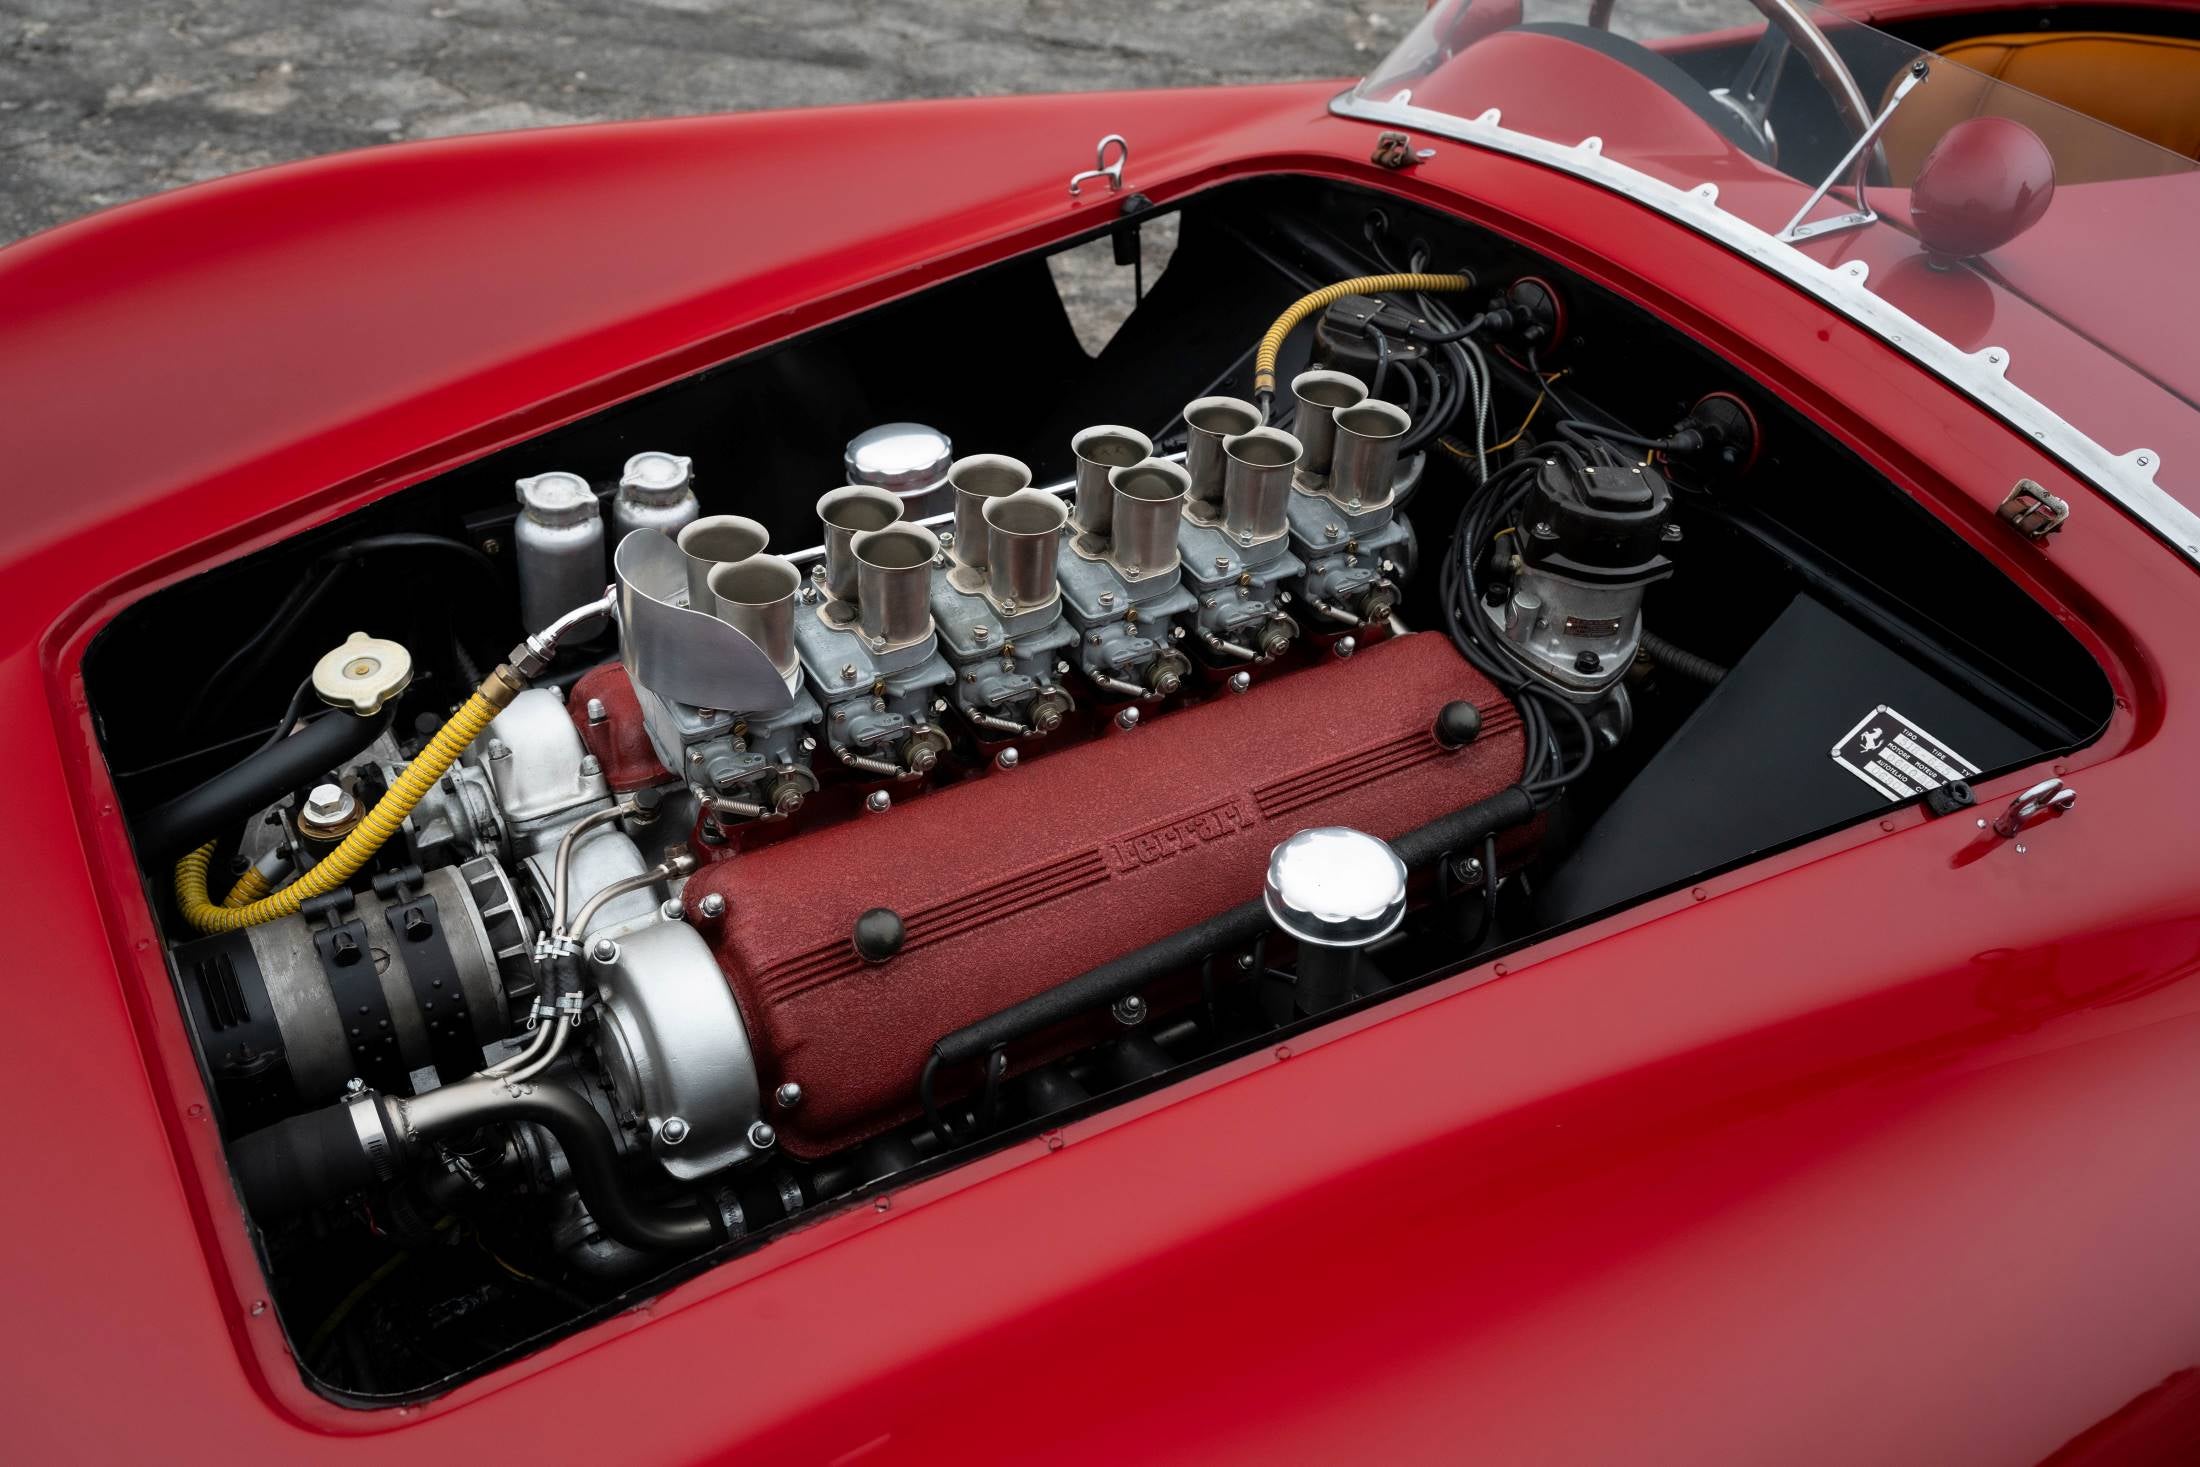 Image showing the engine of the 1957 Ferrari 625 TRC Spider.